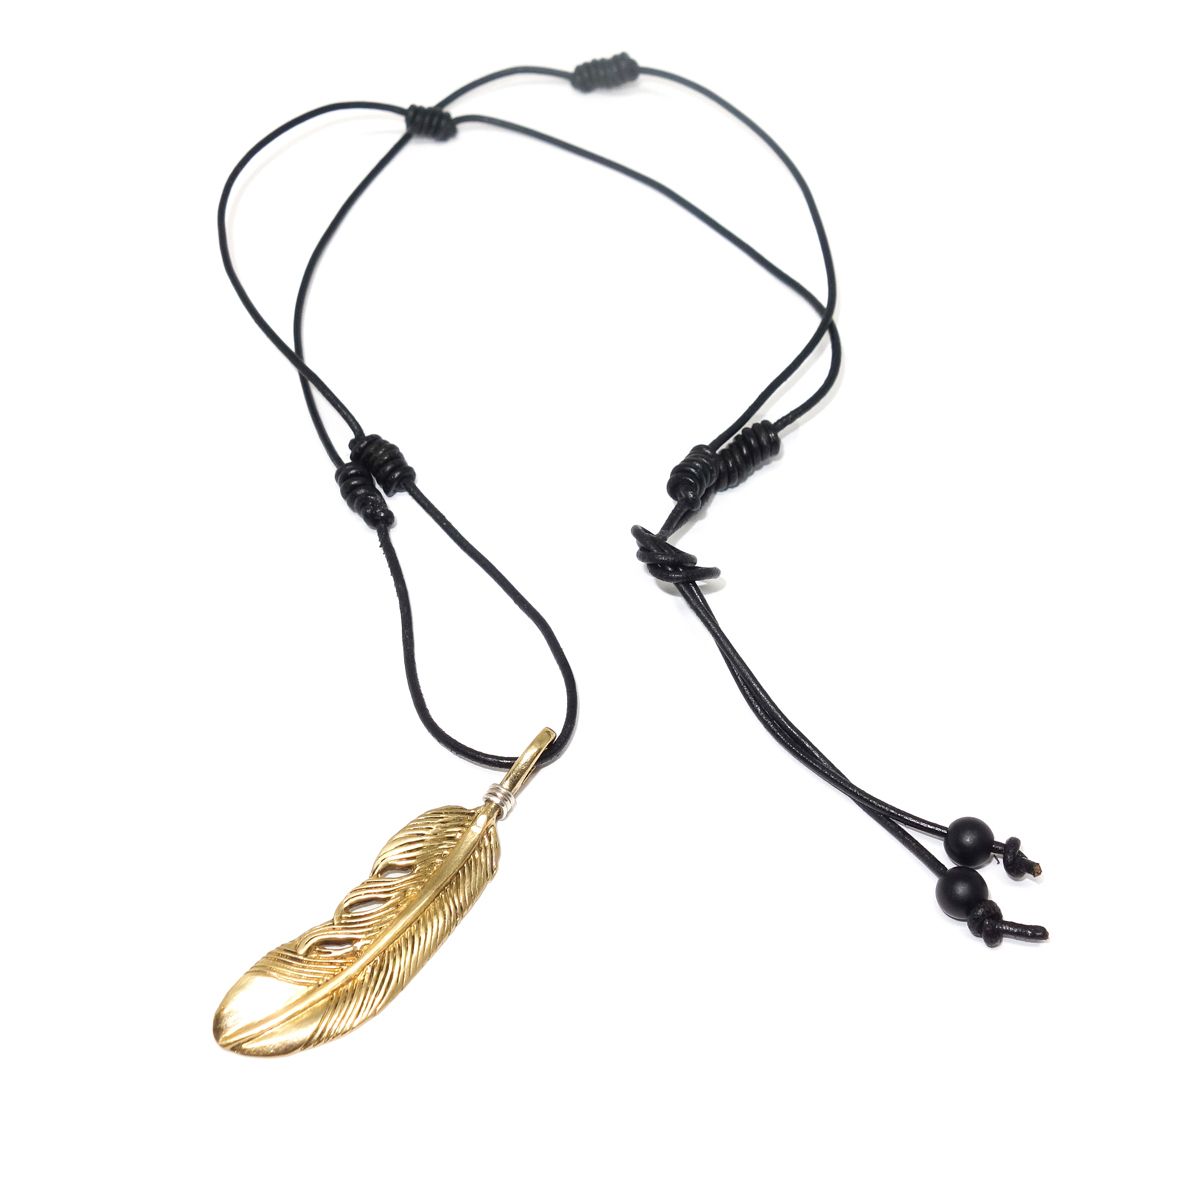 Brass & Leather Feather Necklace Throughout Most Recent Golden Tan Leather Feather Choker Necklaces (View 13 of 25)